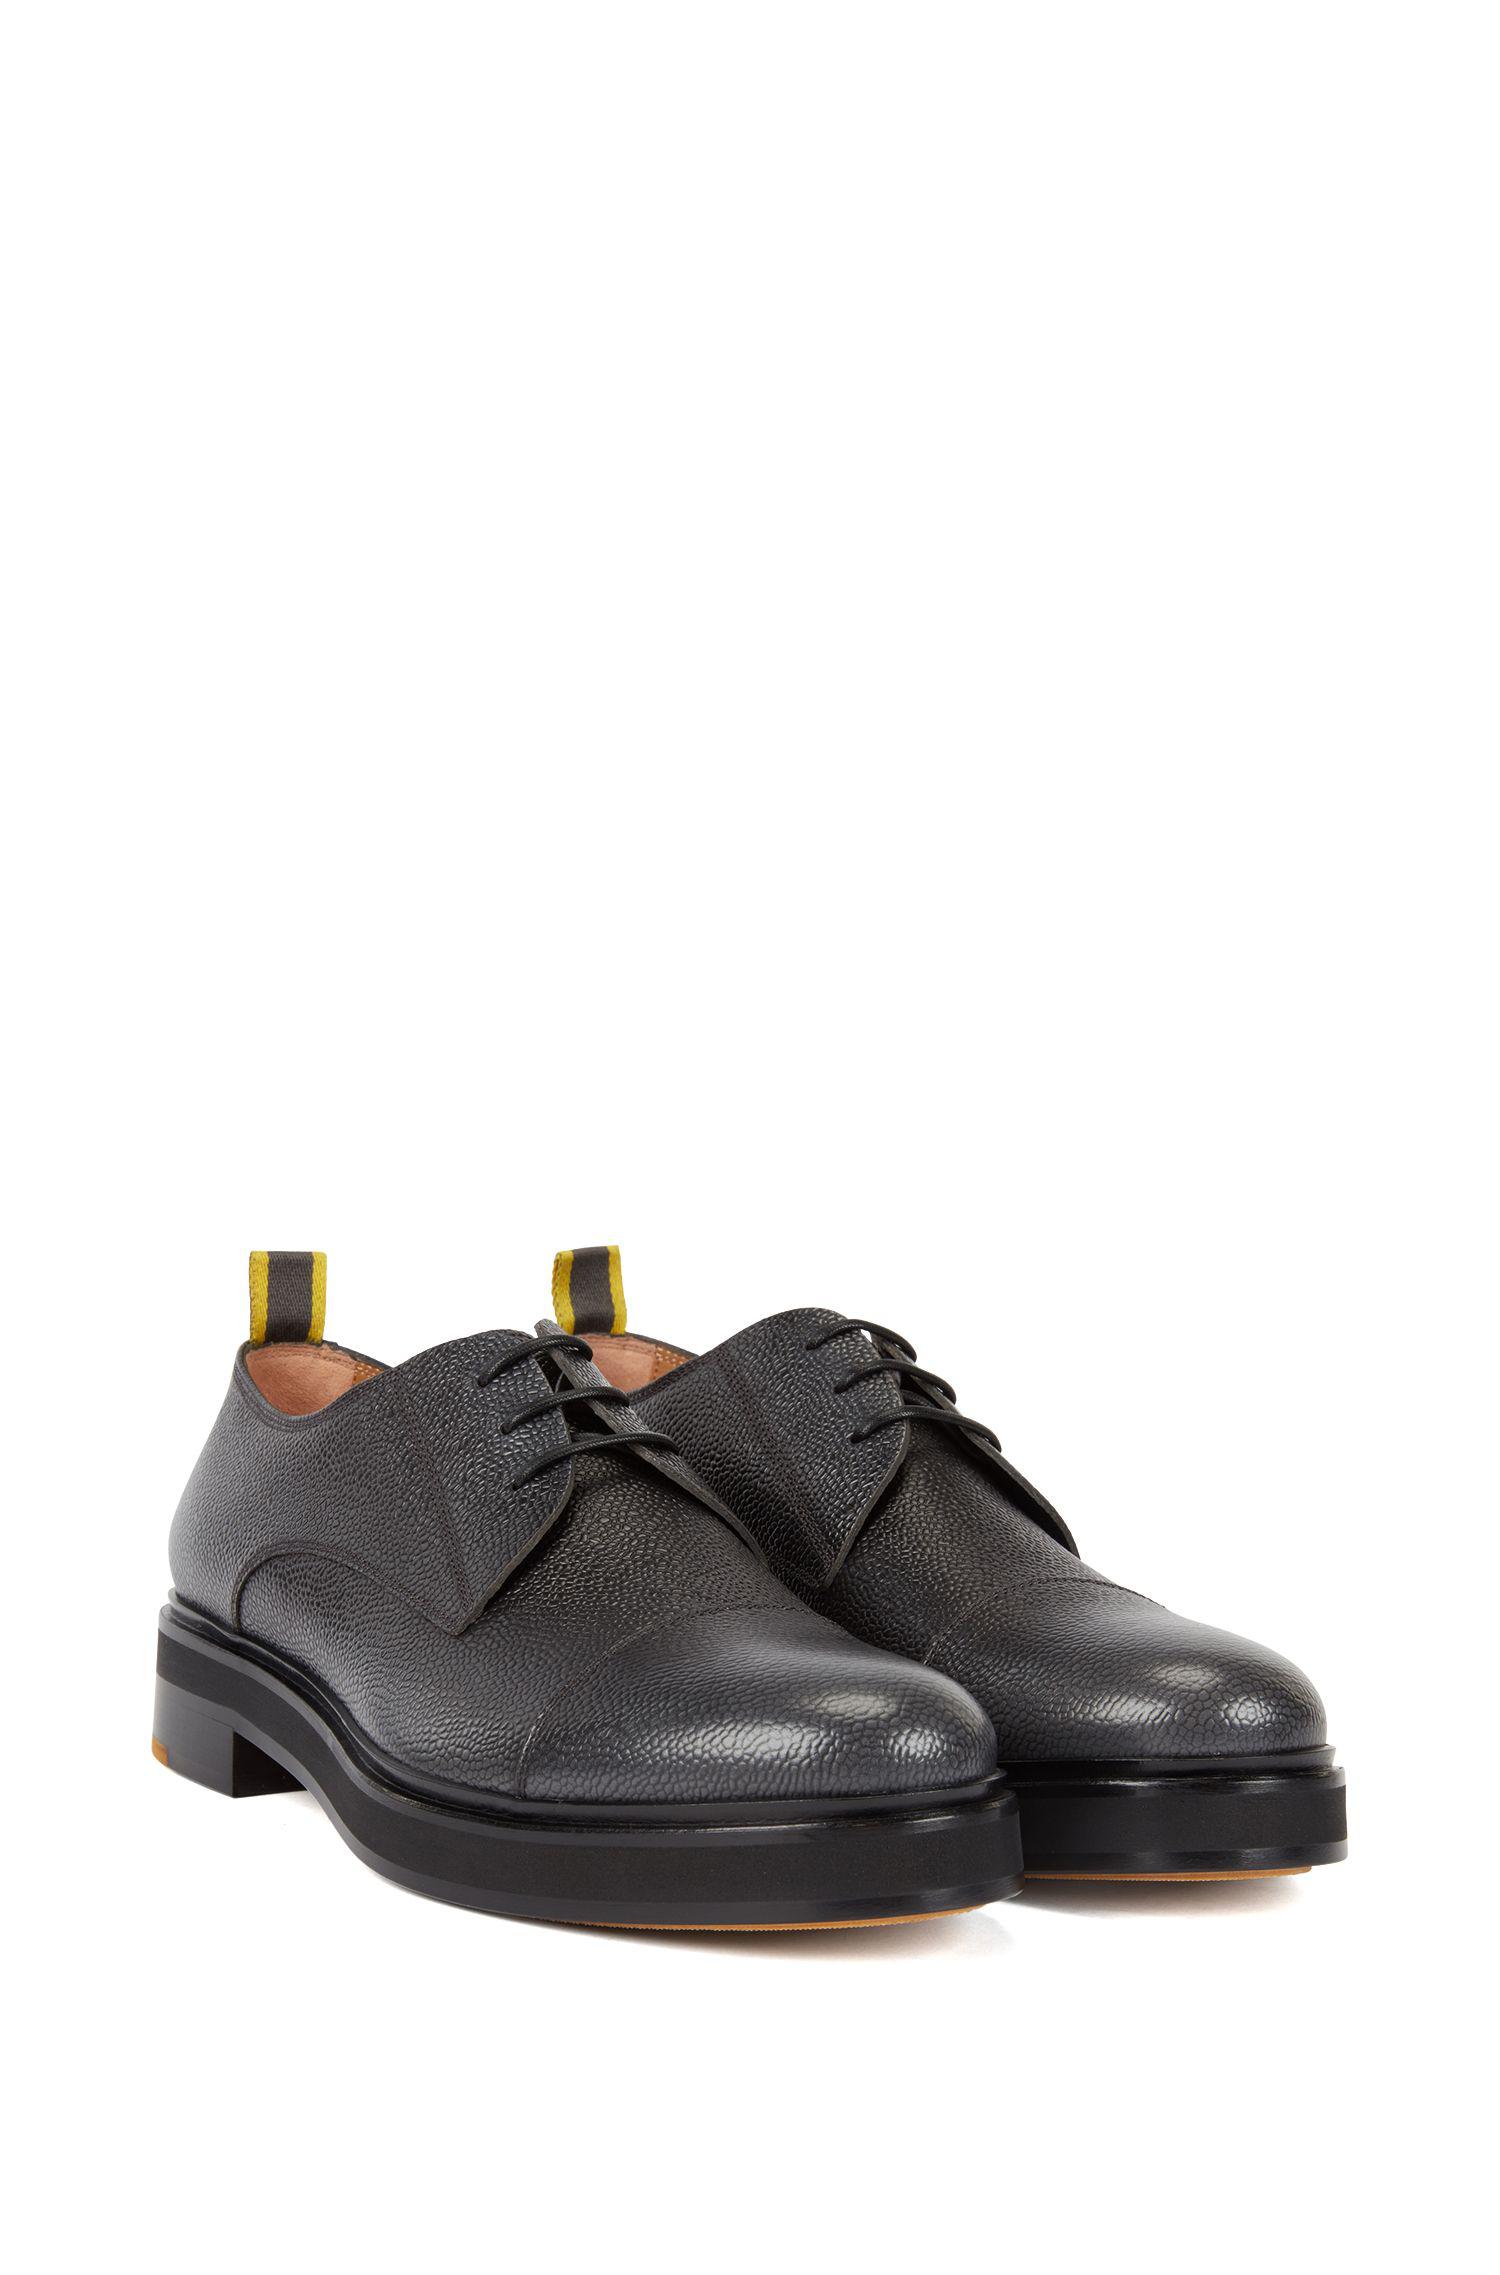 BOSS by Hugo Boss Italian-made Derby Shoes In Grainy Scotch Leather in ...